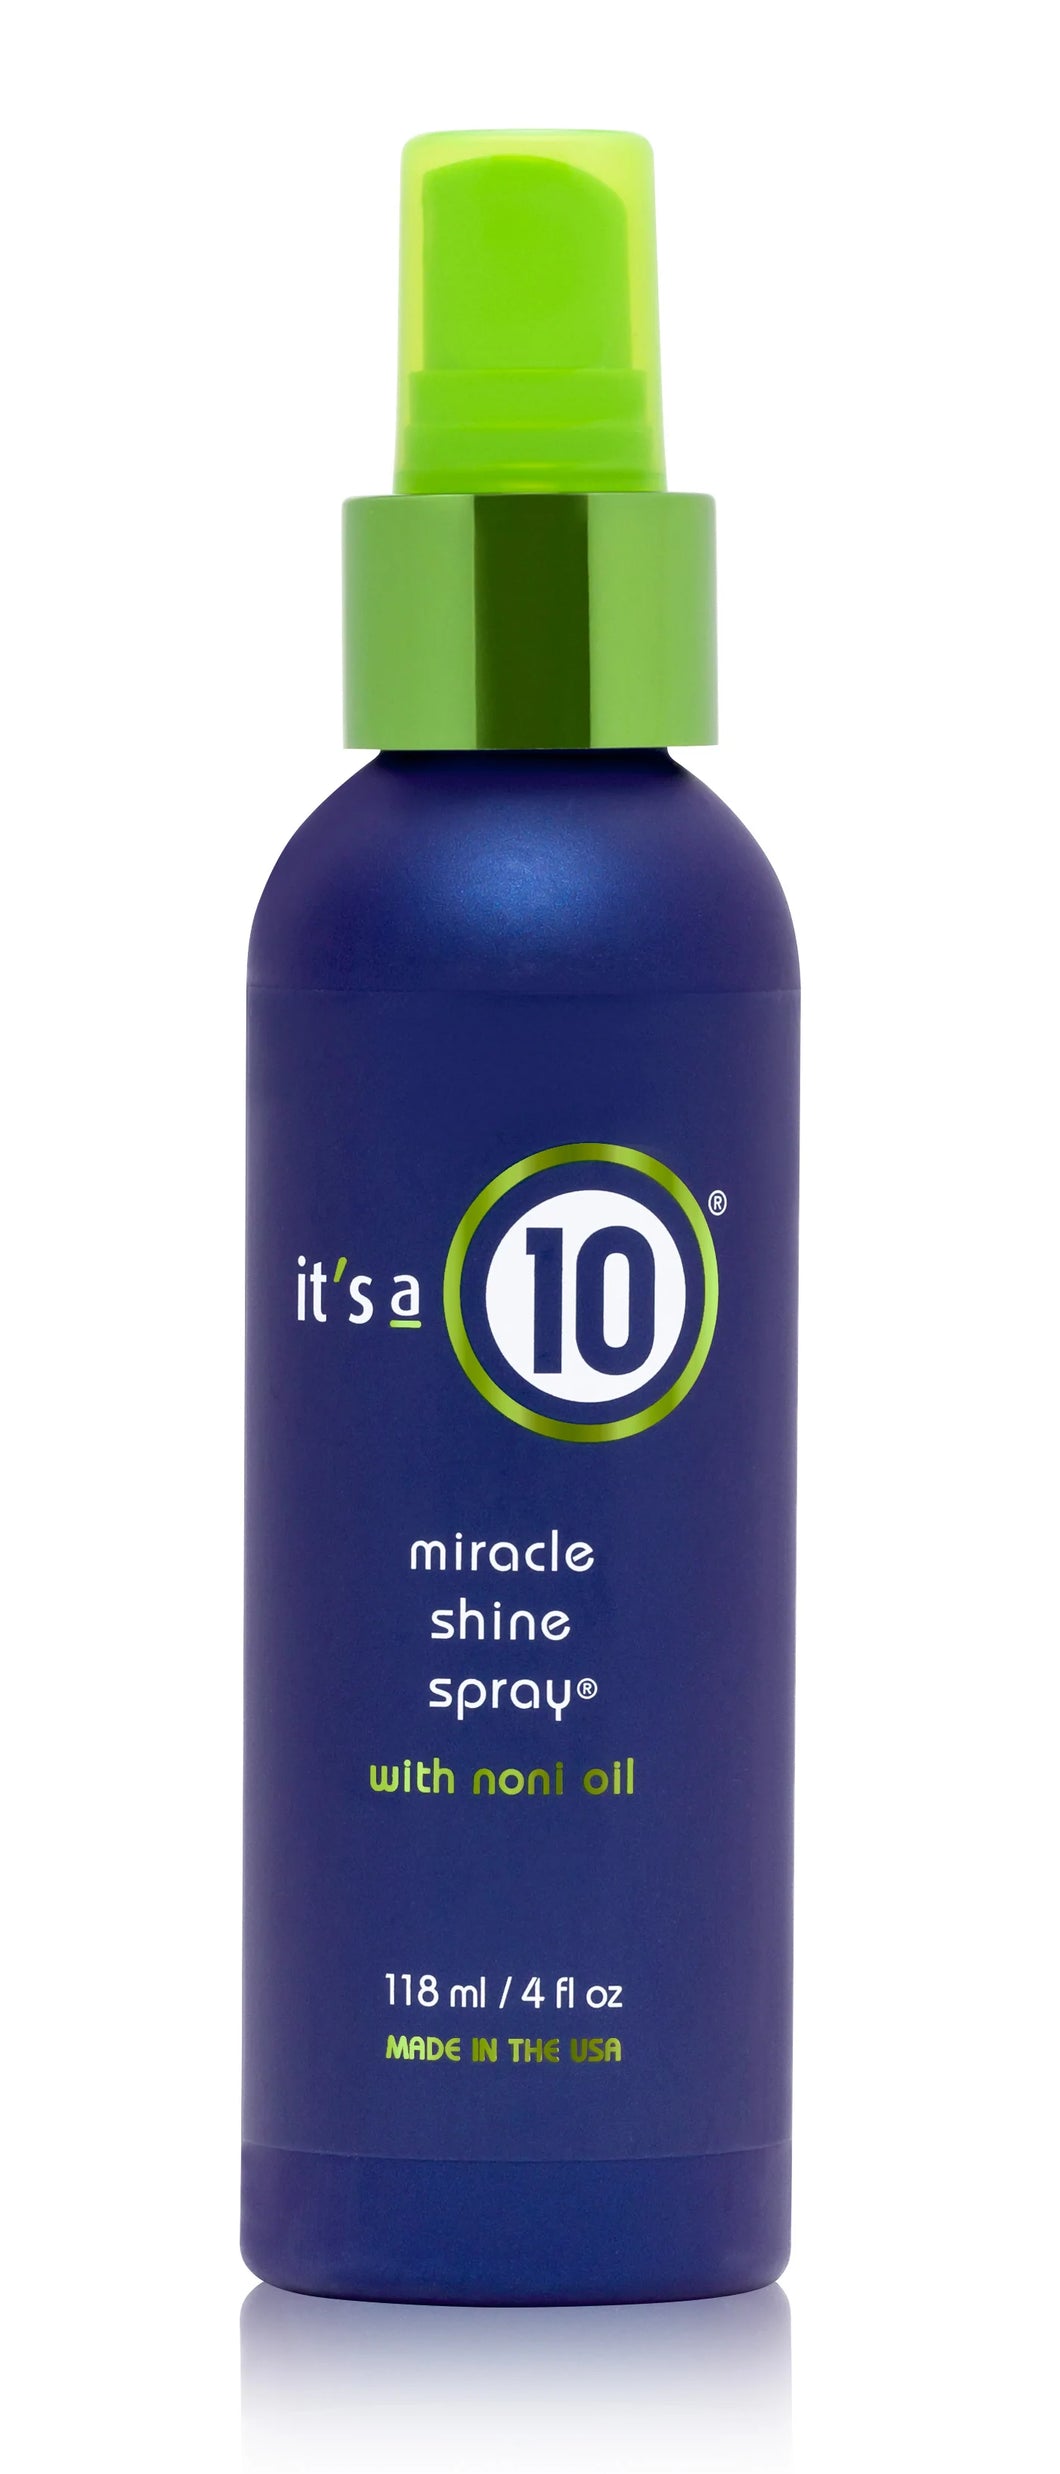 IT'S A 10 MIRACLE SHINE SPRAY